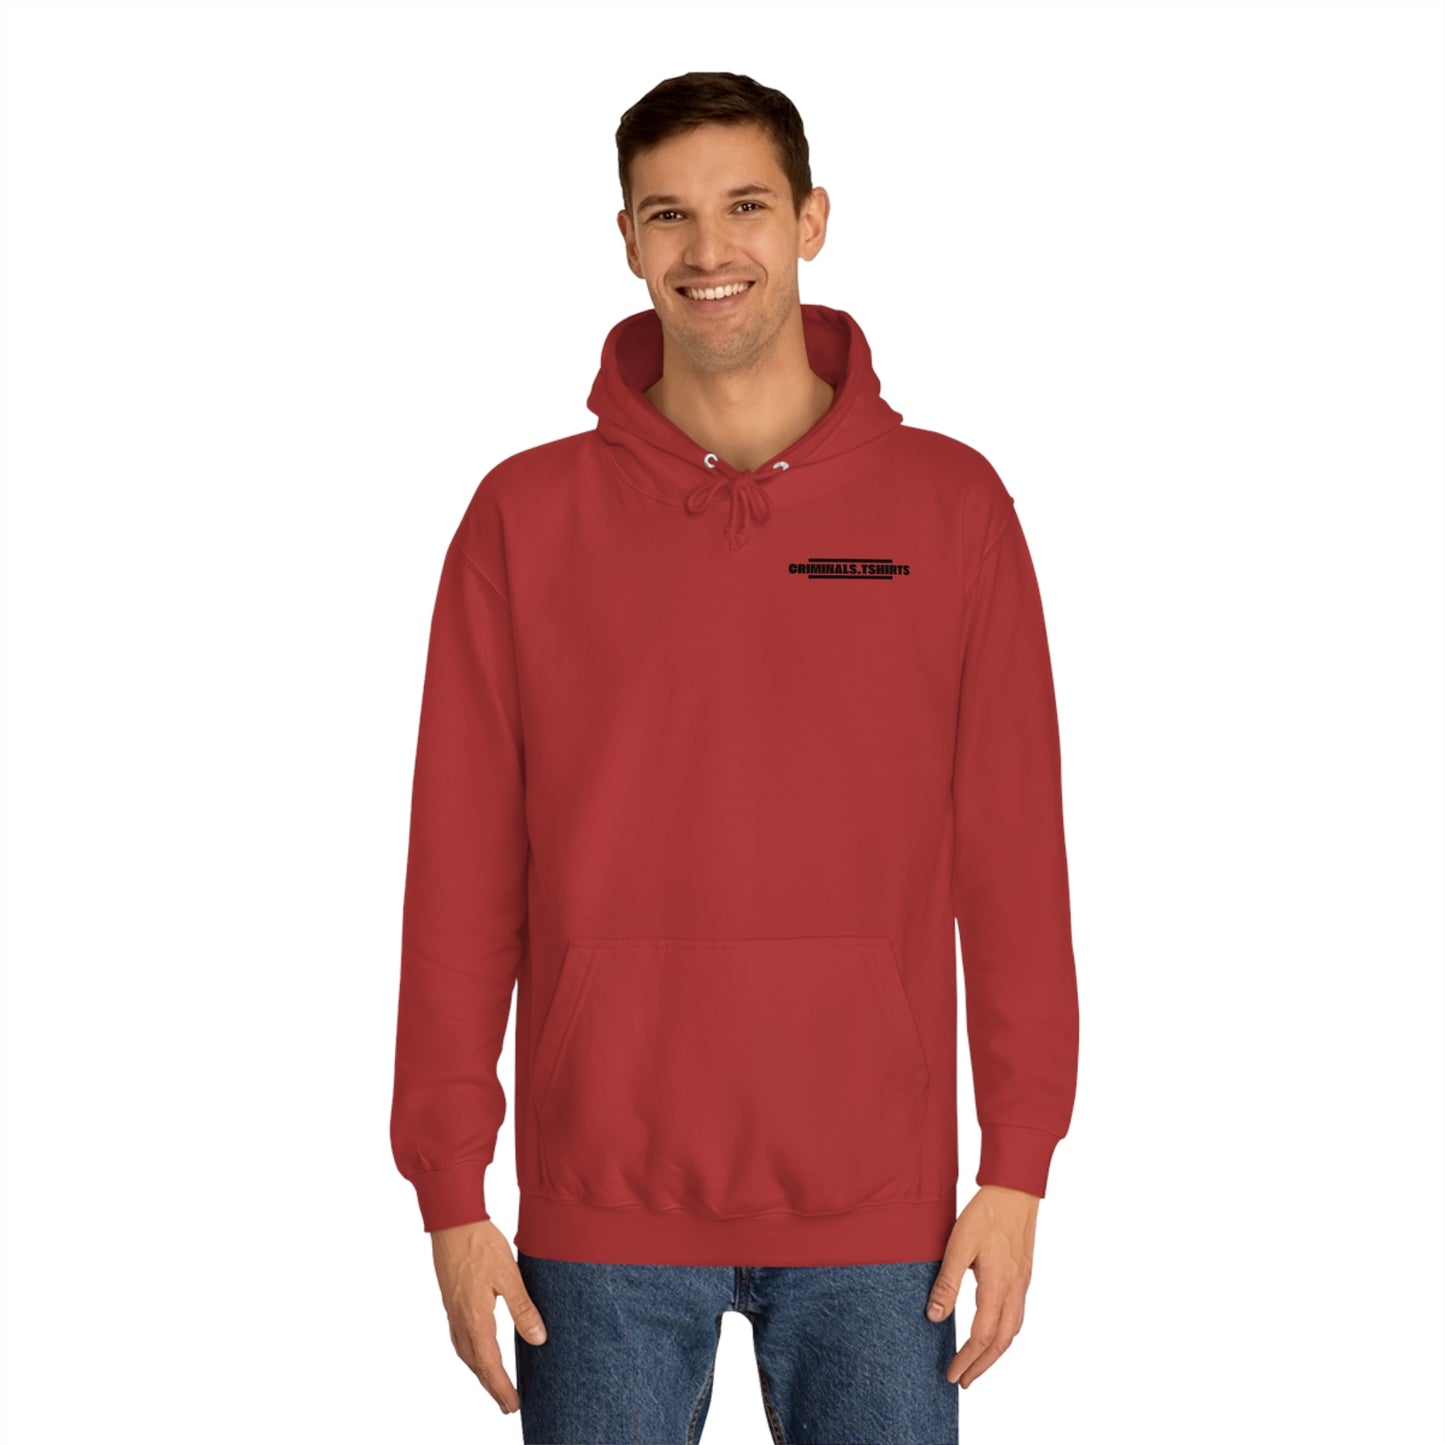 The rizzard of oz College Hoodie